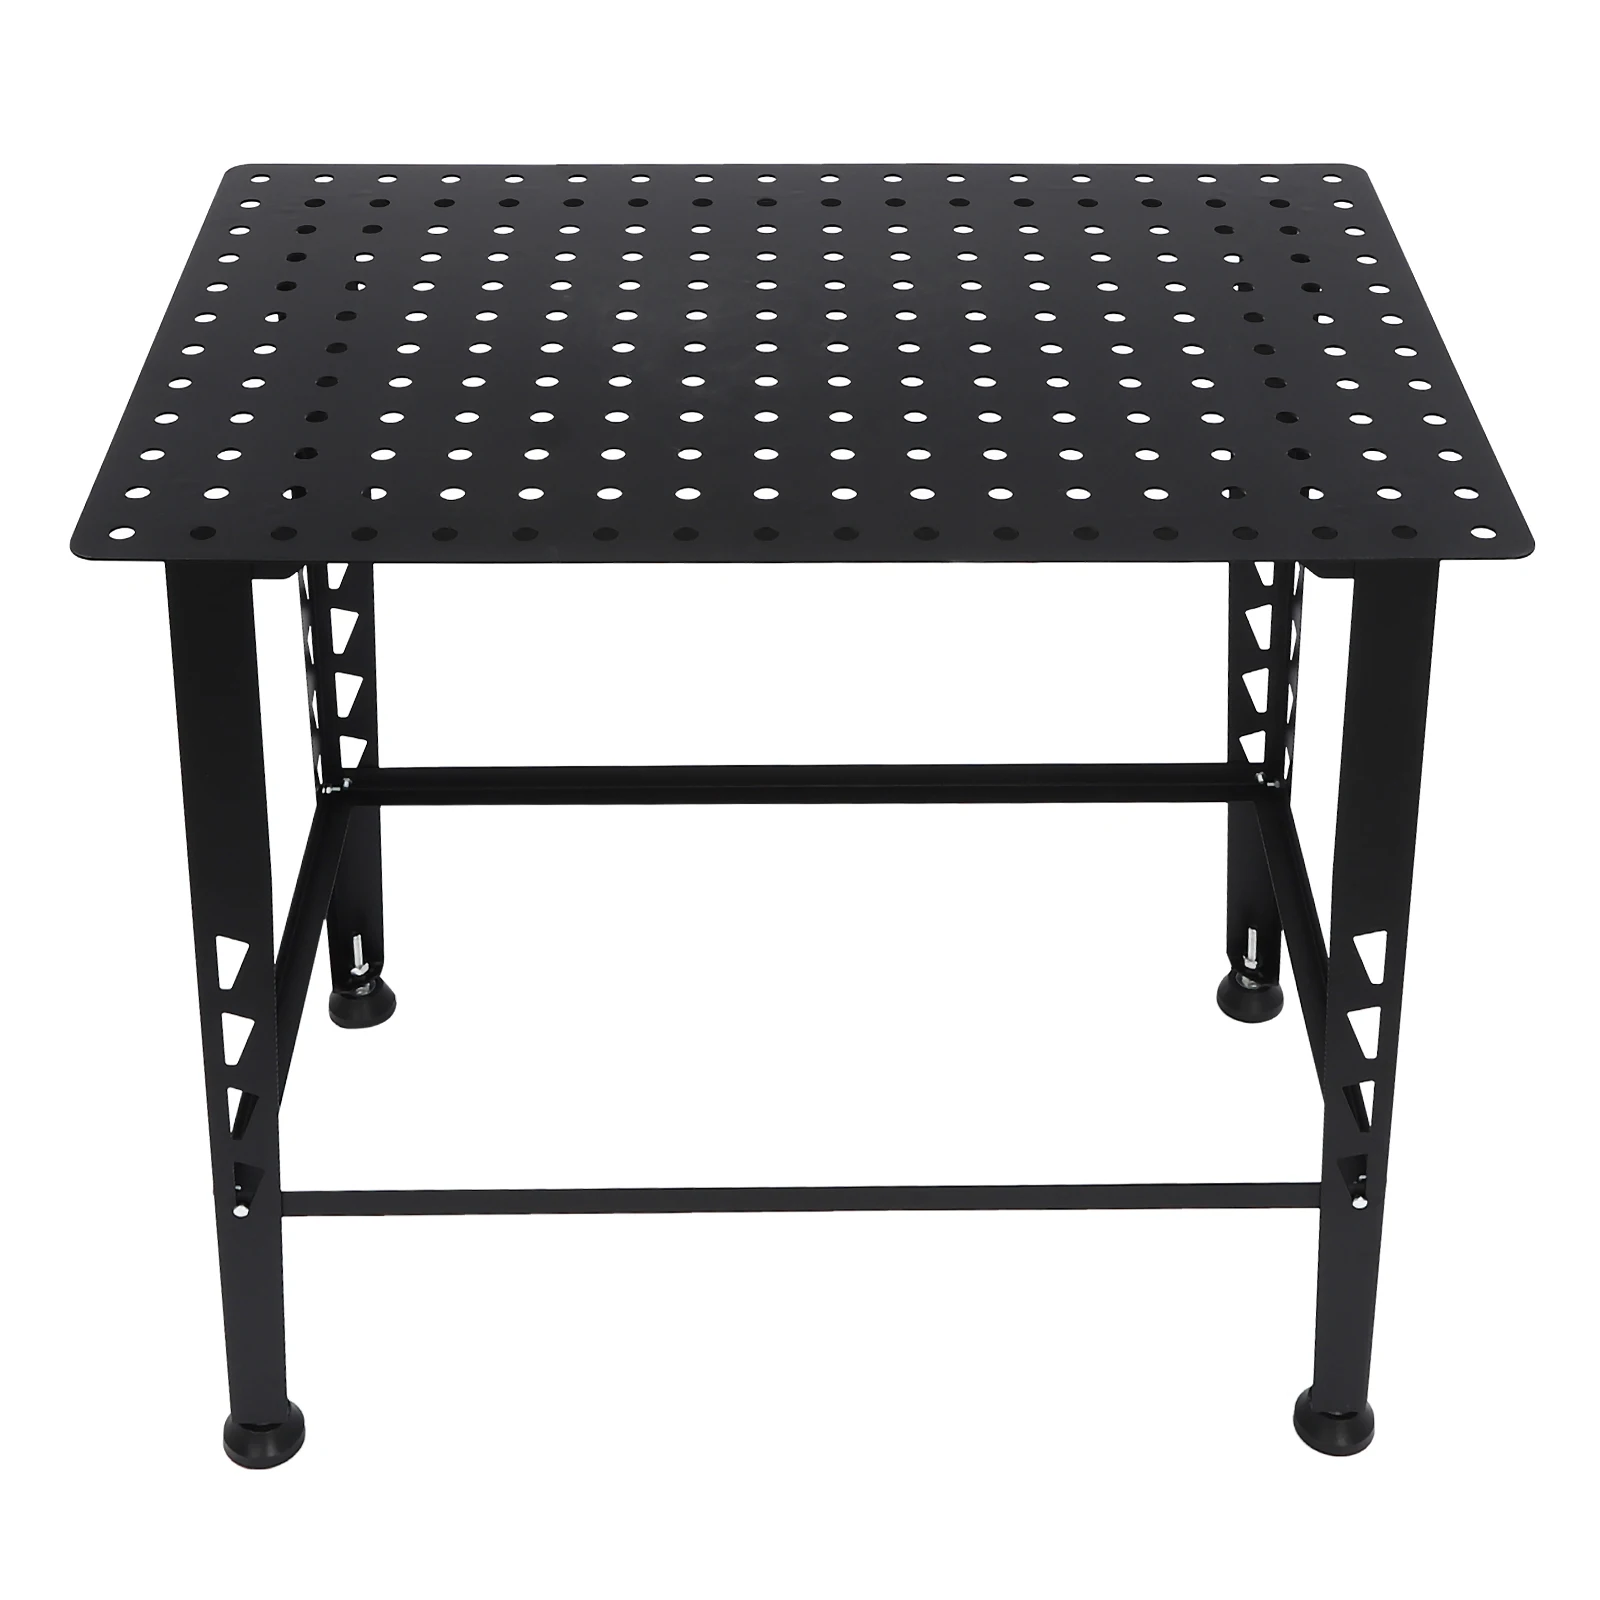 600lbs Welding Fabrication Table Workbench Desktop Universal Work Table with 4*Stop Bases, 2* F Clamps, 2* Quick Clamps